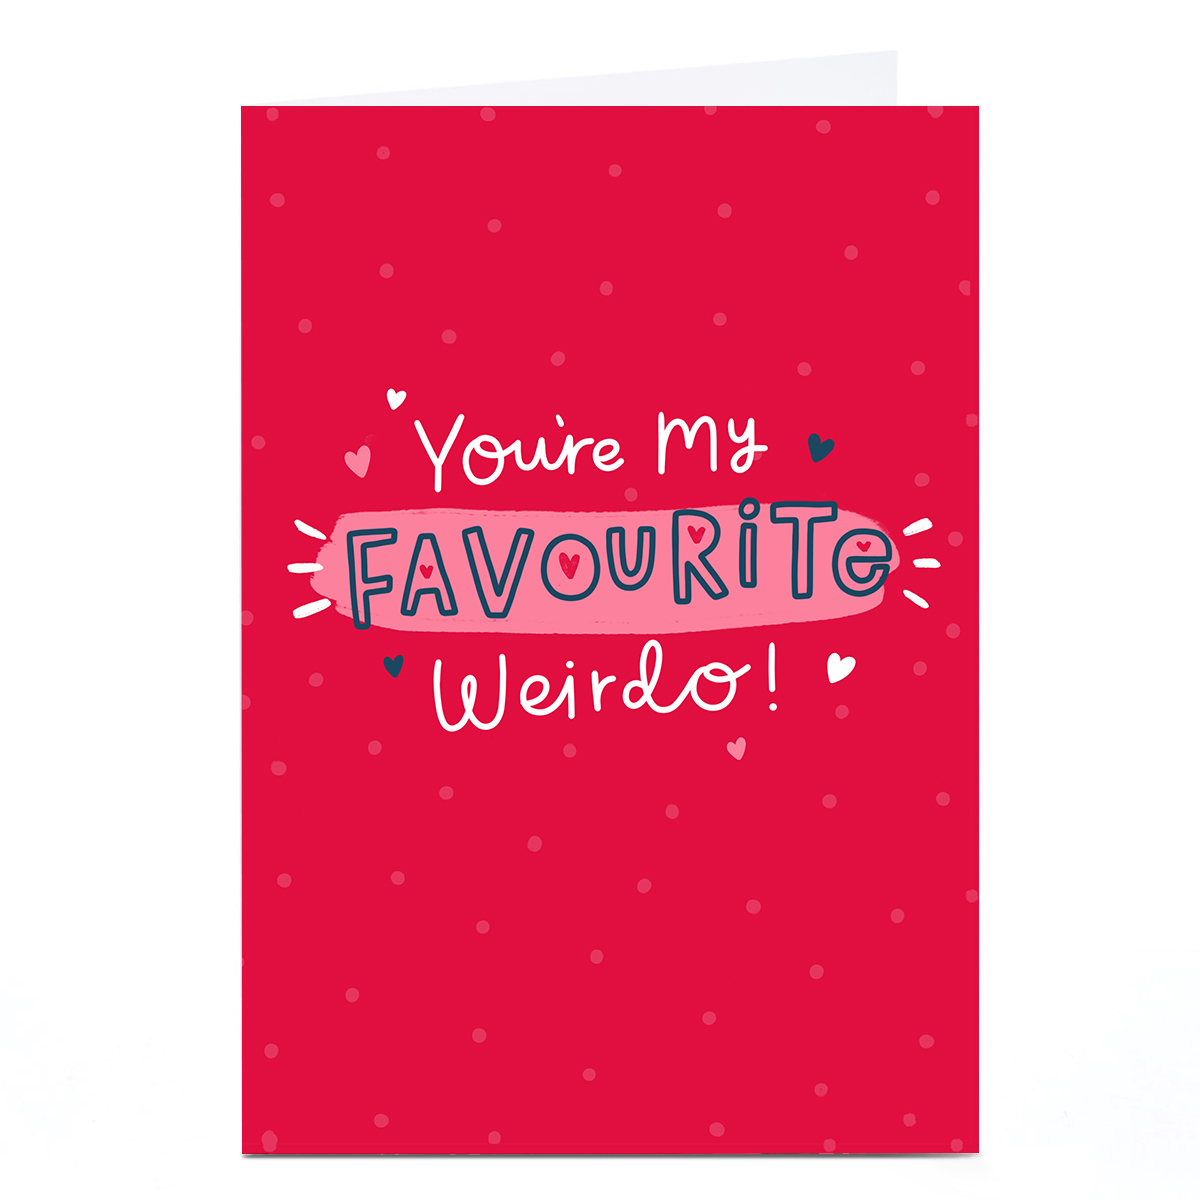 Personalised Jess Moorhouse Valentine's Day Card - Favourite Weirdo